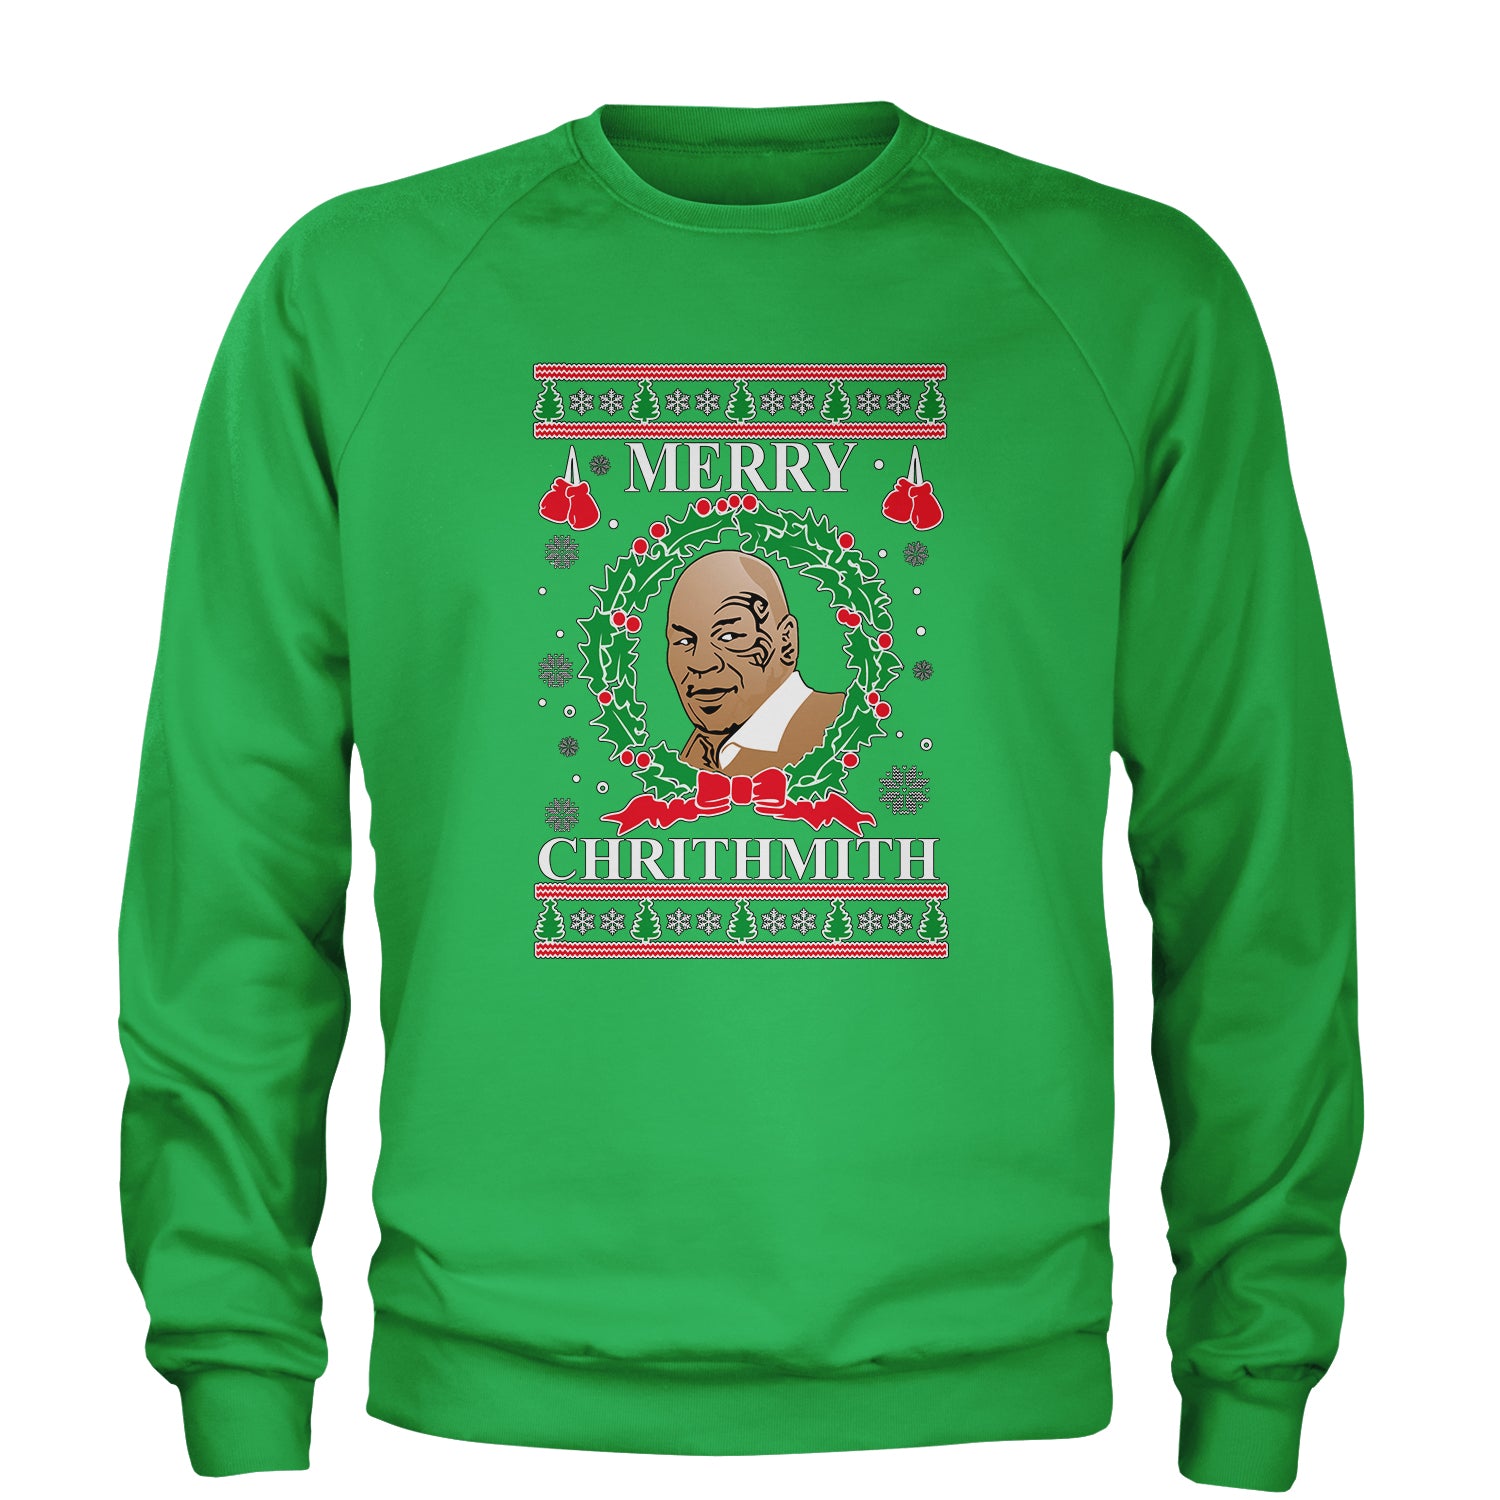 Merry Chrithmith Ugly Christmas Adult Crewneck Sweatshirt christmas, holiday, michael, mike, sweater, tyson, ugly by Expression Tees